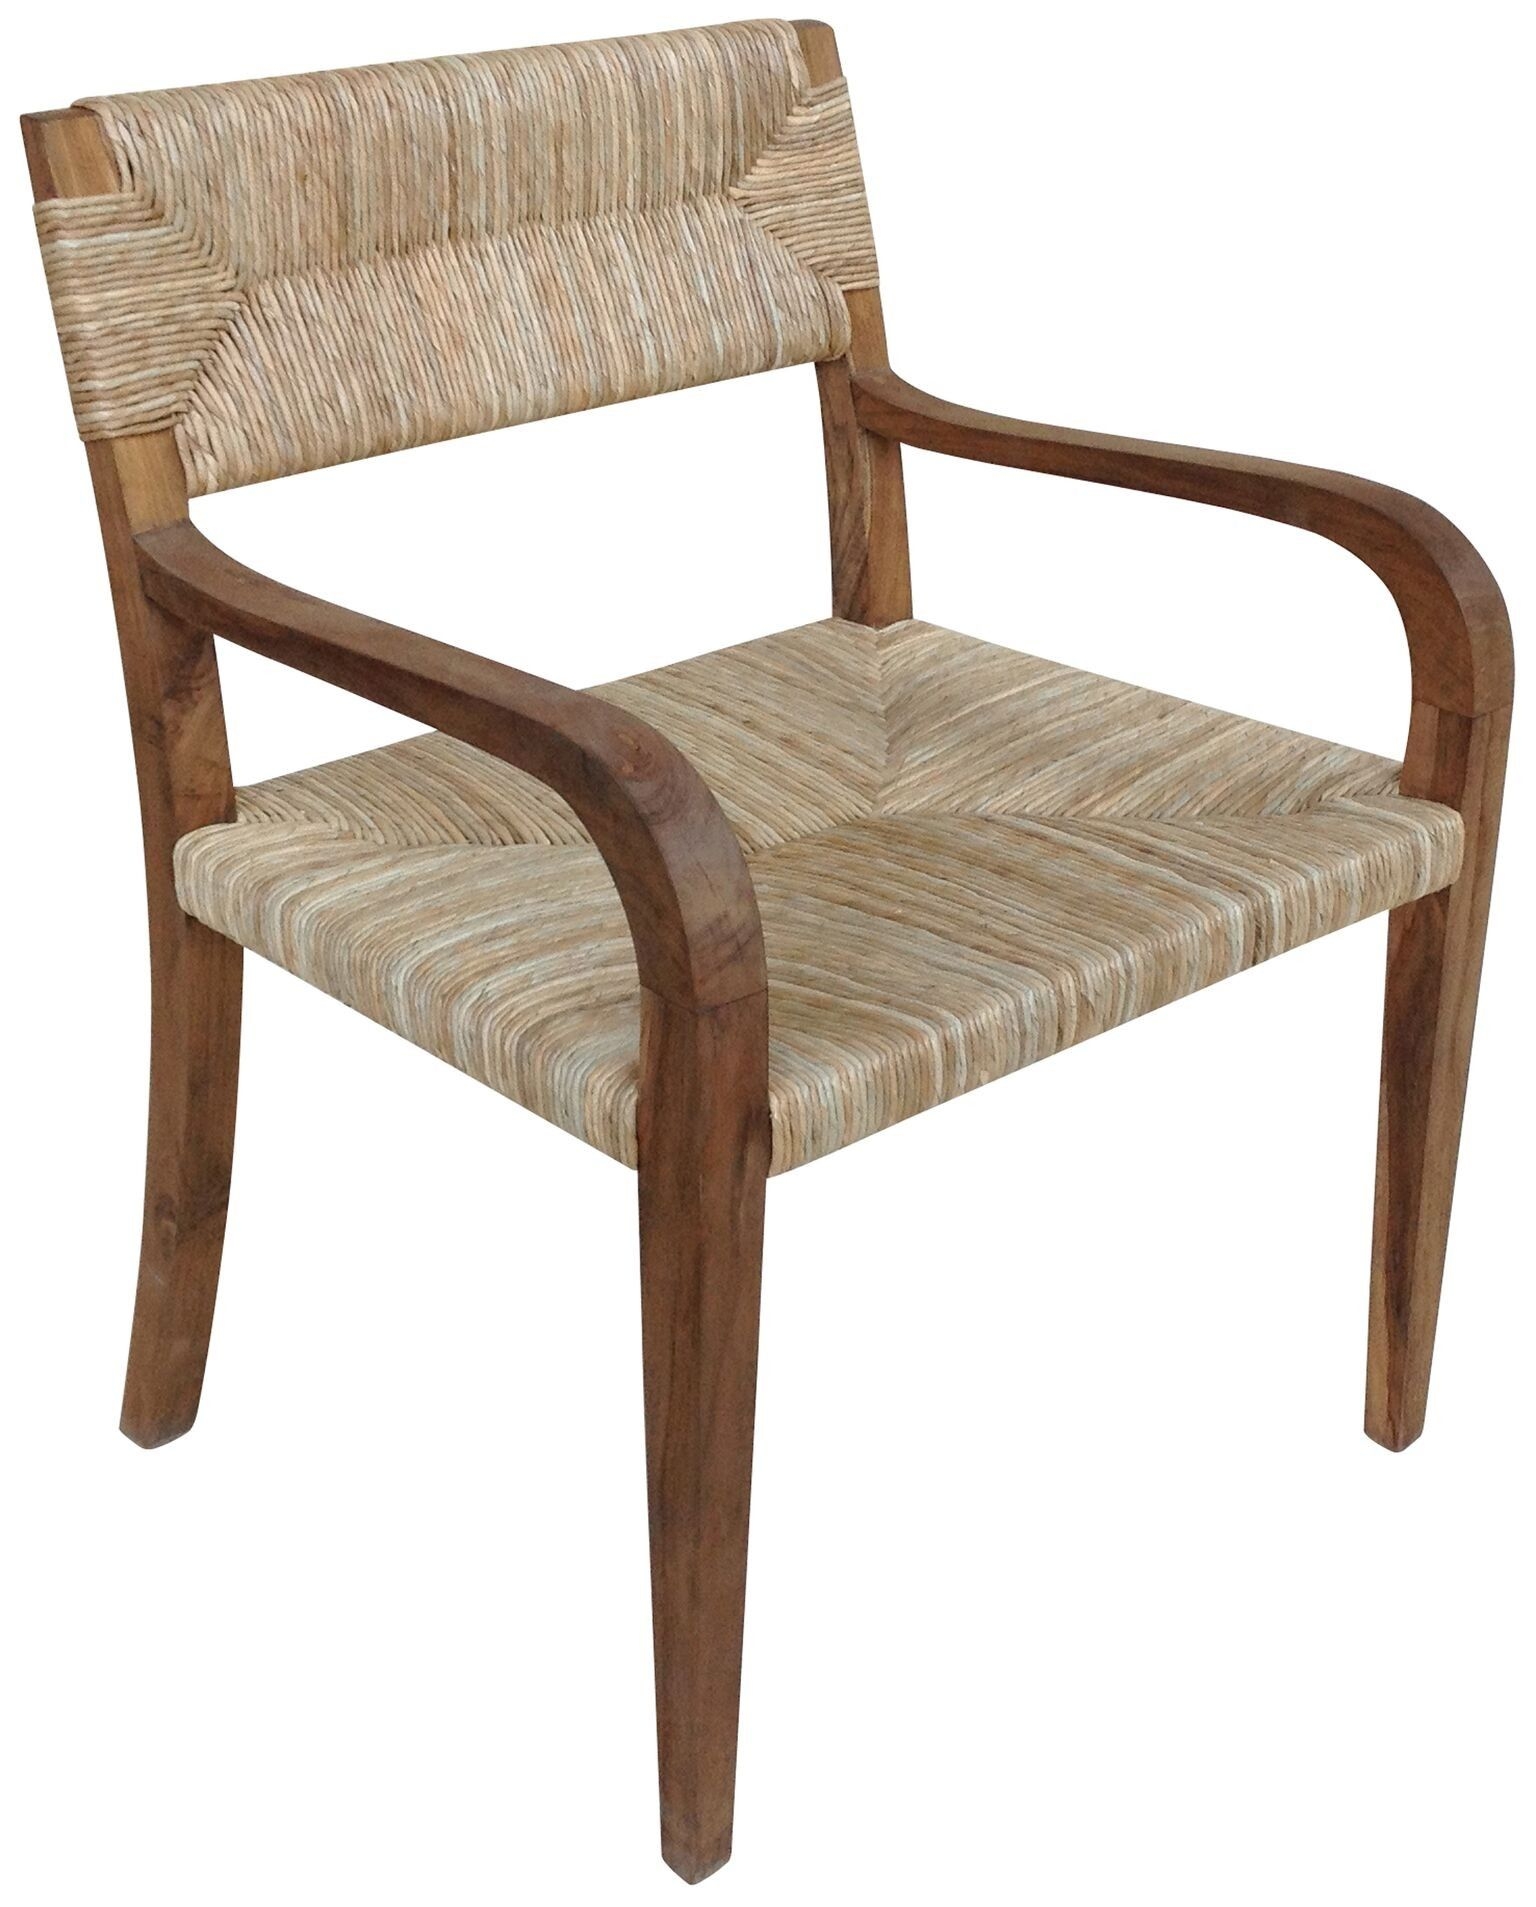 Pottery barn seagrass chair